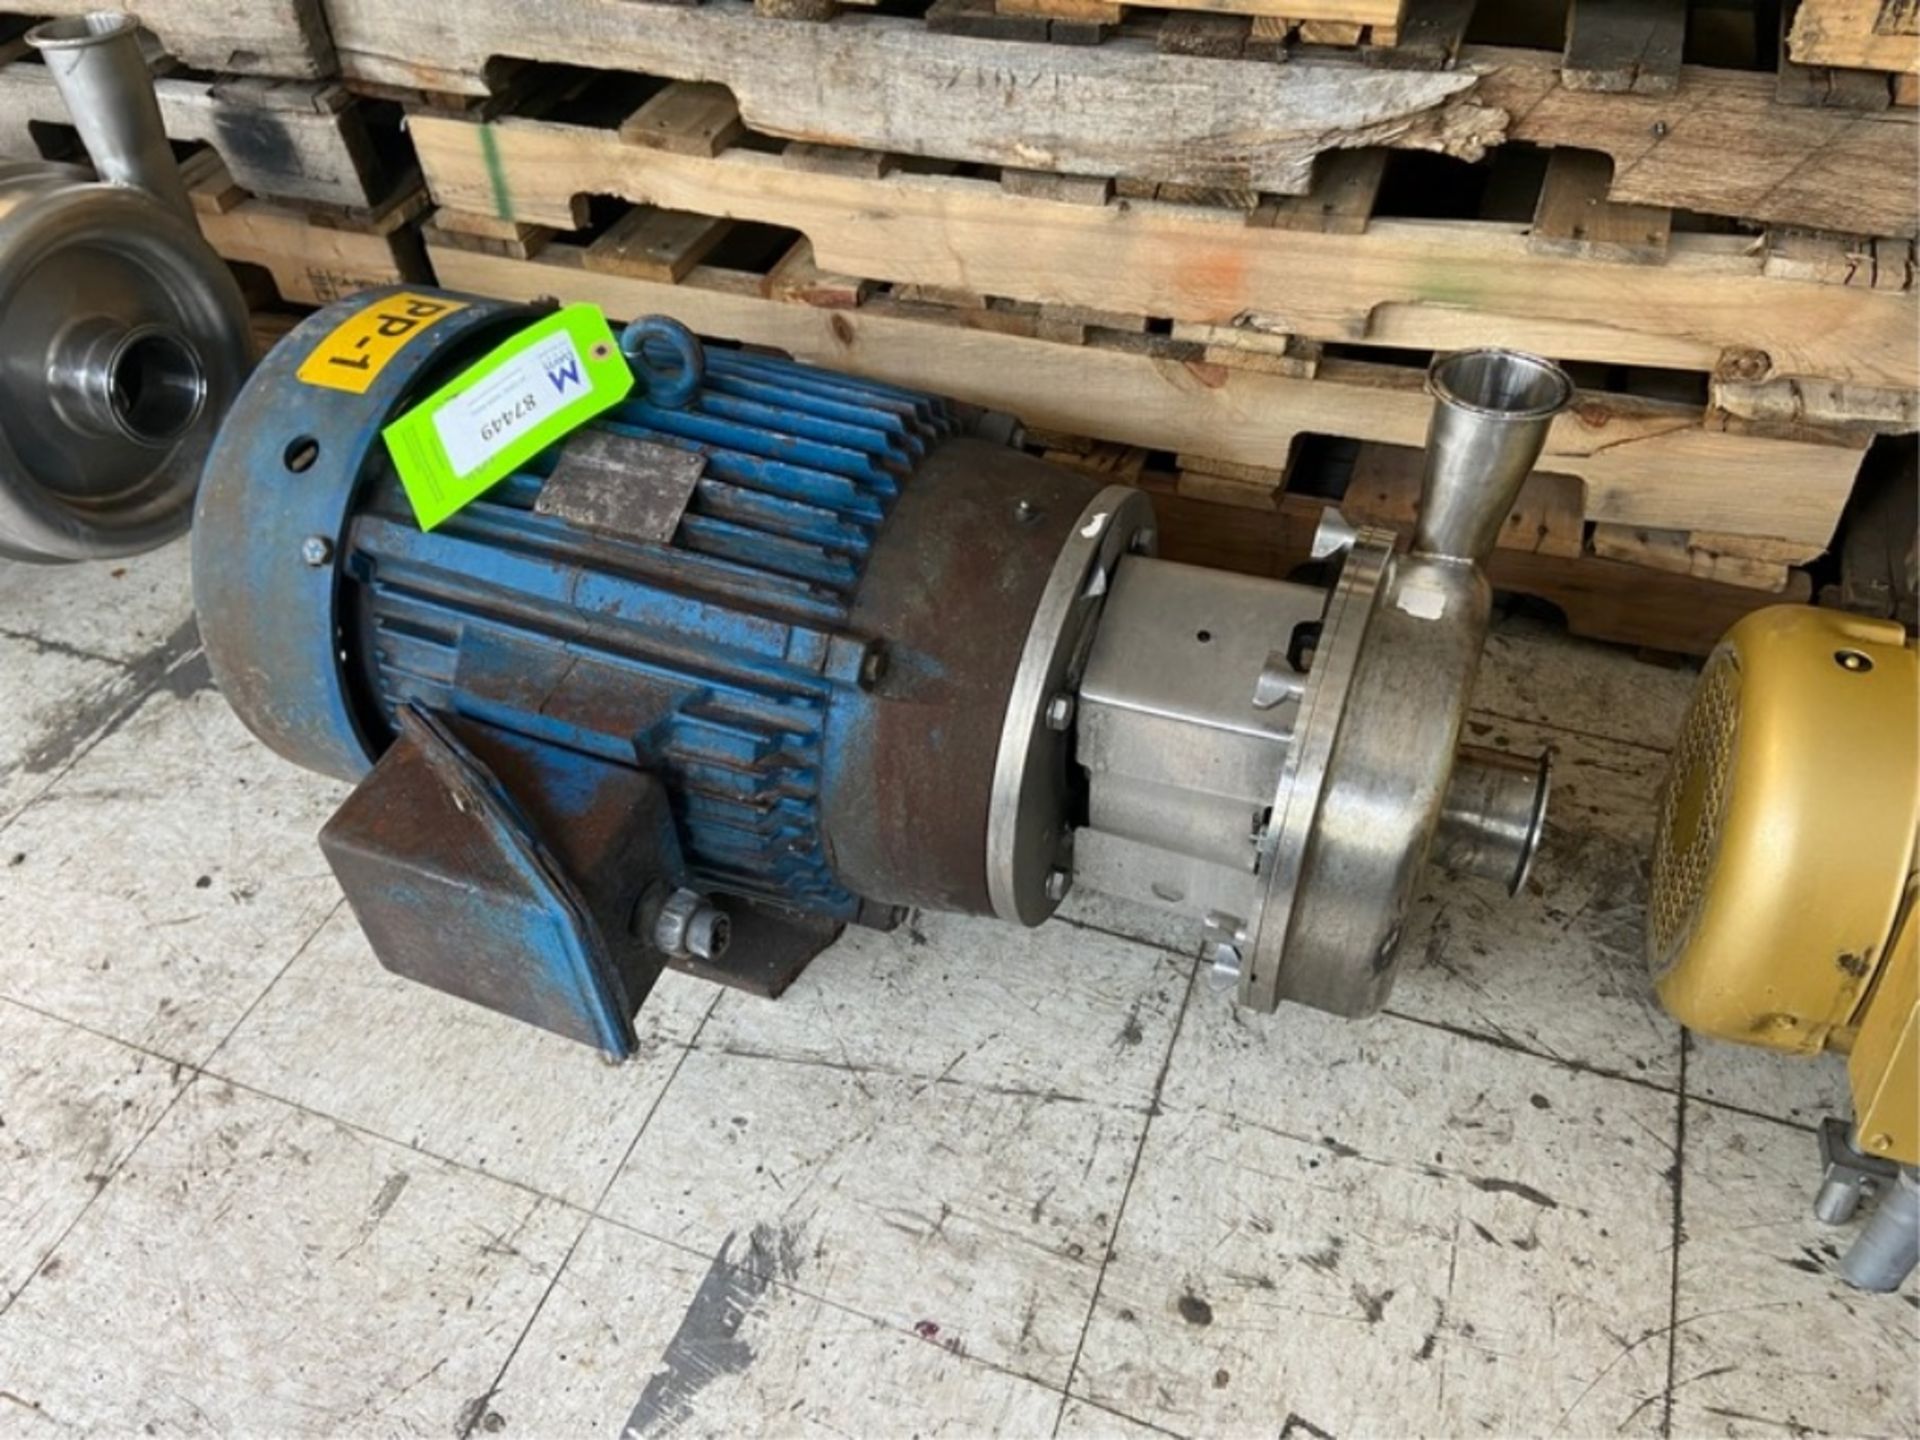 Alpha-Laval 30 hp Centrifugal Pump,-S/N 73363, 230/460 Volts, 3 Phase, with Aprox. 3" x 2" Clamp